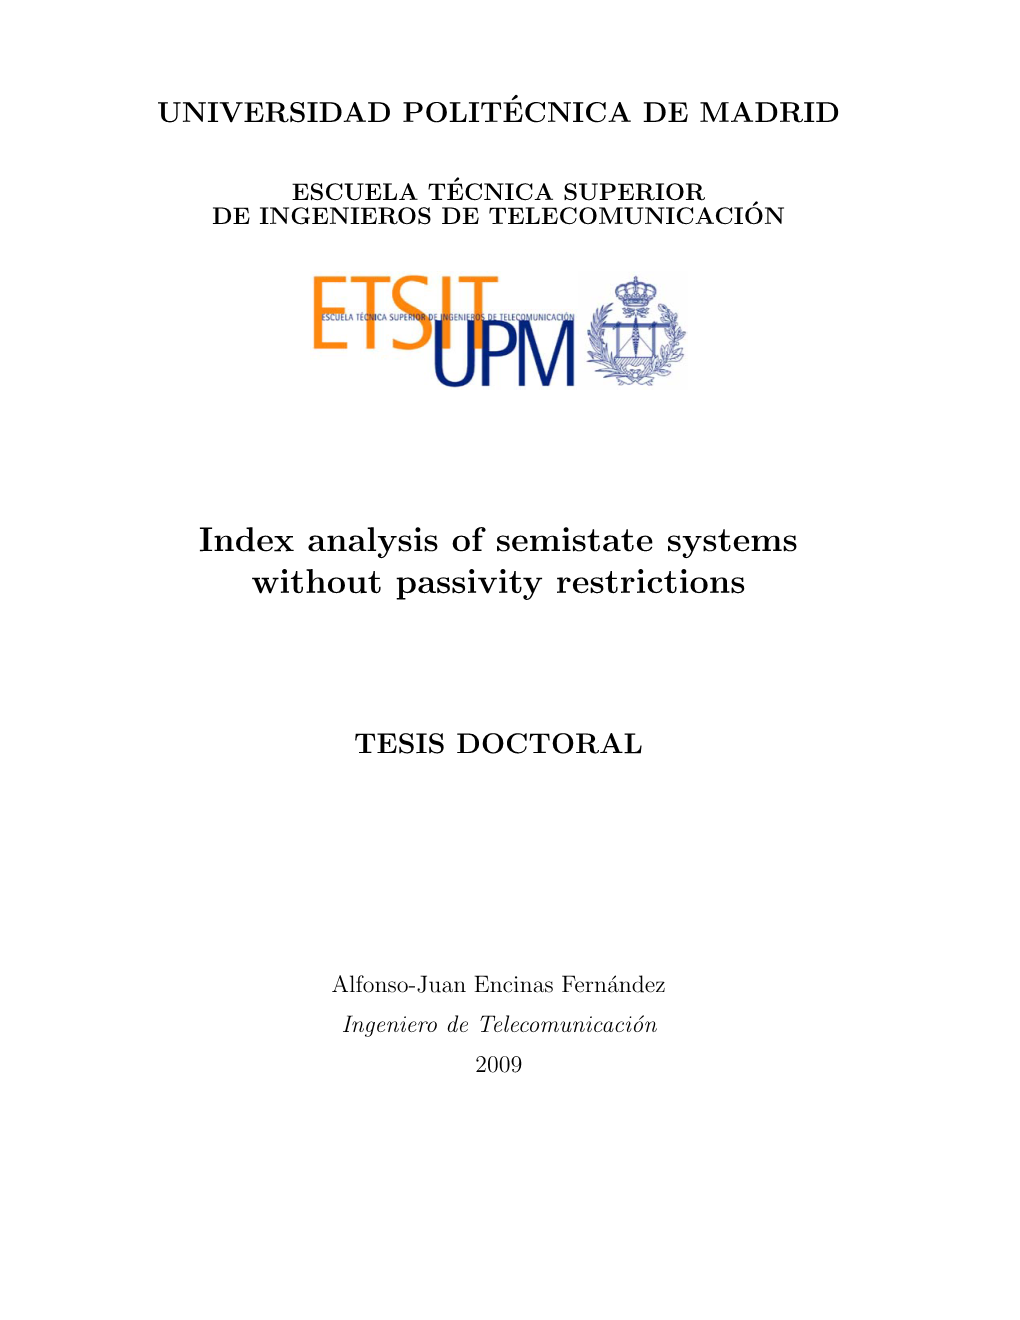 Index Analysis of Semistate Systems Without Passivity Restrictions